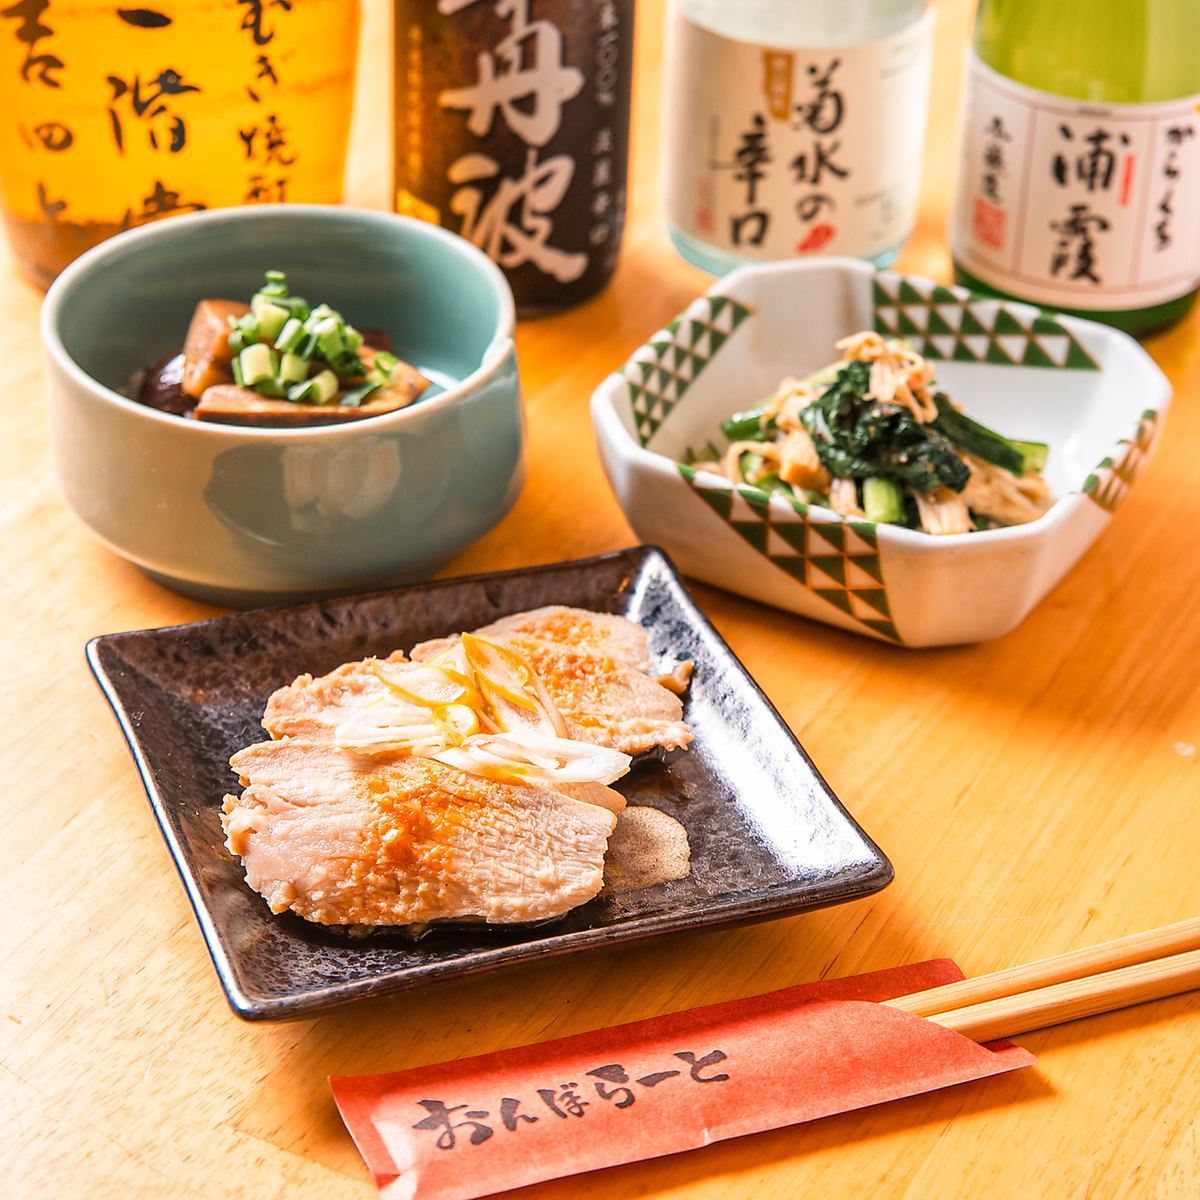 If you are looking for an izakaya near Kawasaki Station, please come to our store!